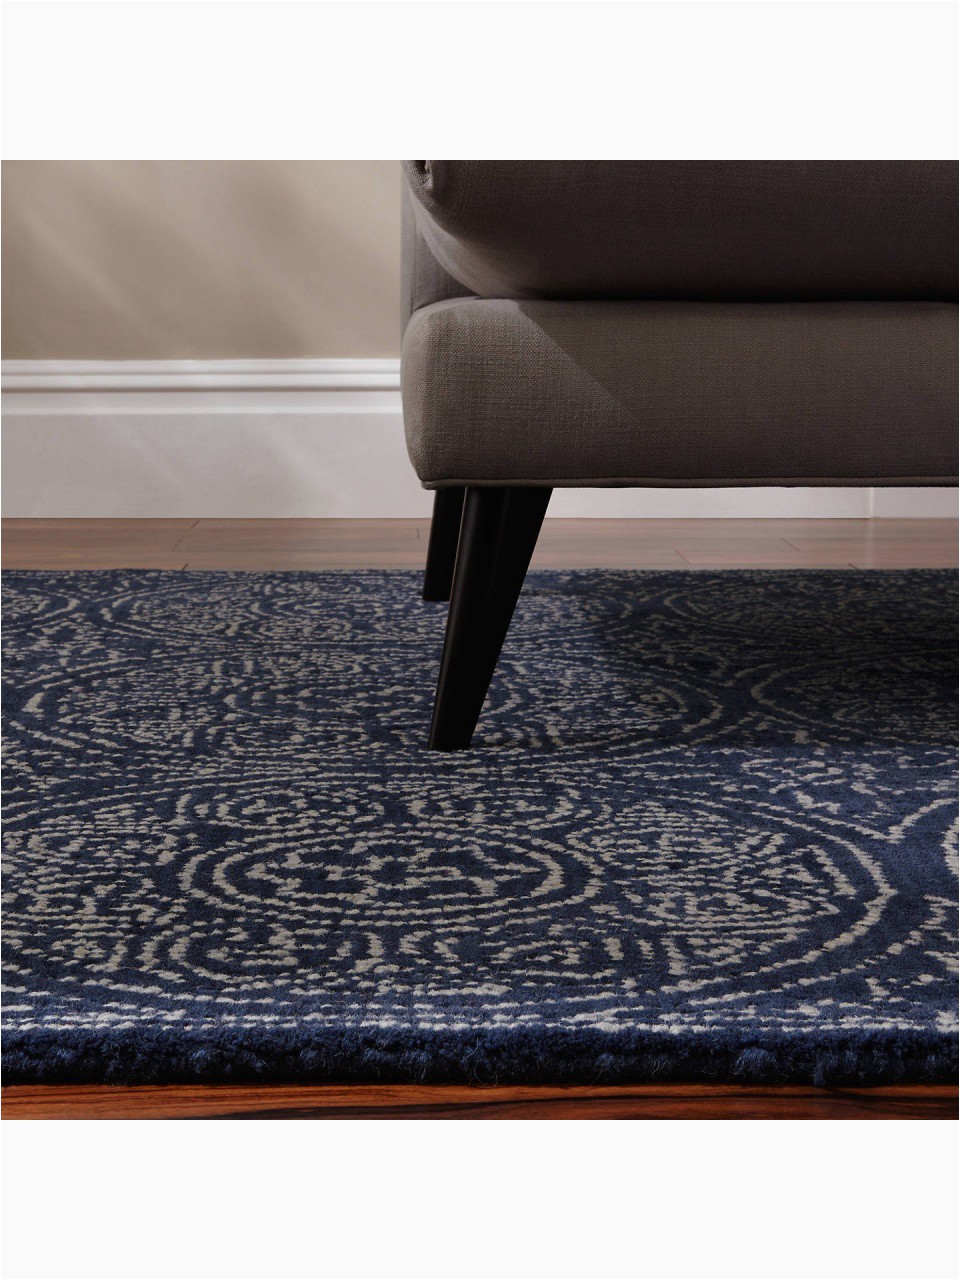 bed bath and beyond bathroom rugs john lewis and partners cadiz rug blue l120 x w180cm from bed bath and beyond bathroom rugs